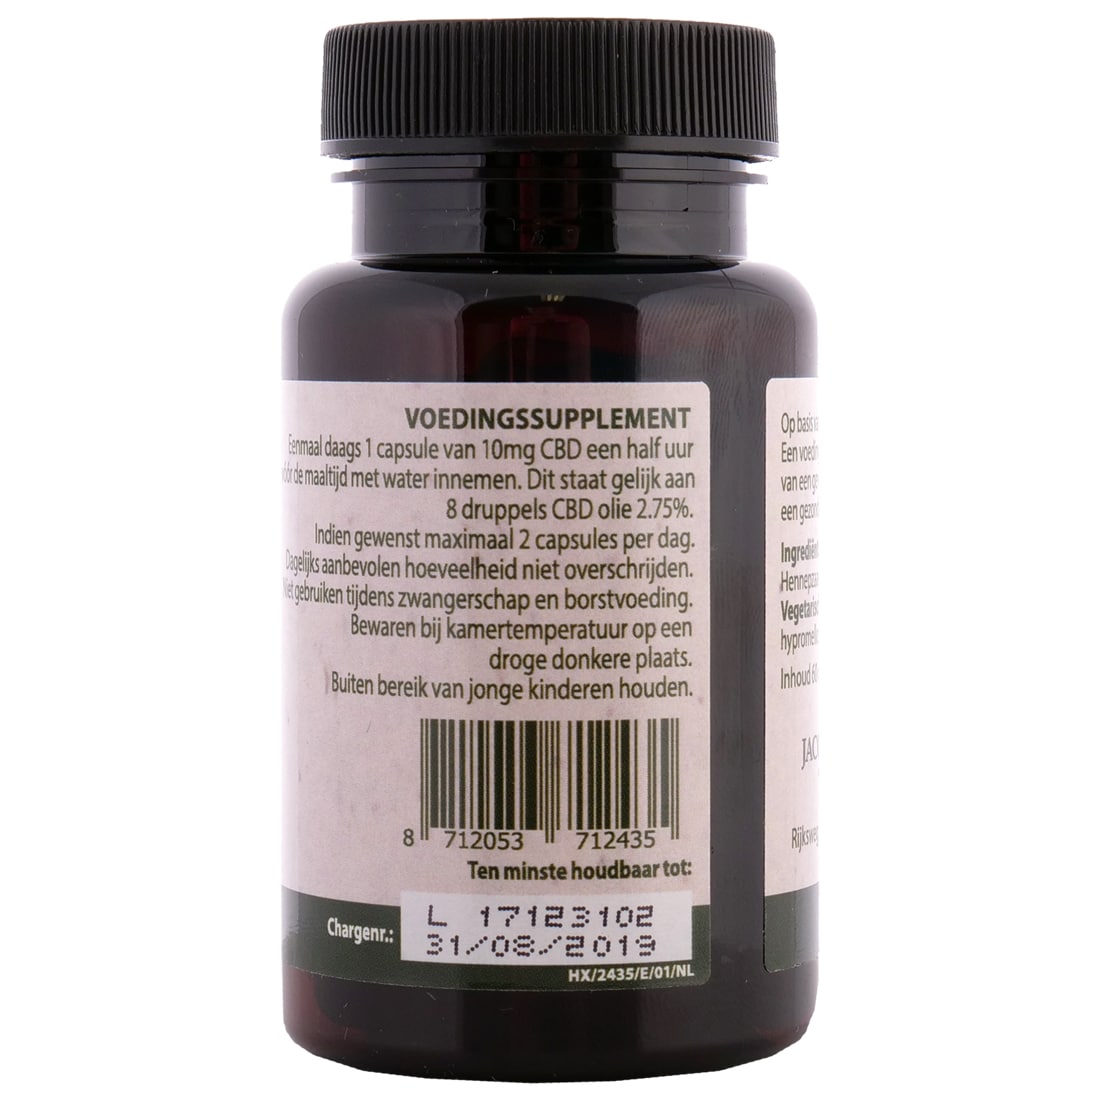 A close up of a bottle of Jacob Hooy CBD Capsules (60 pcs - 10mg) supplement.